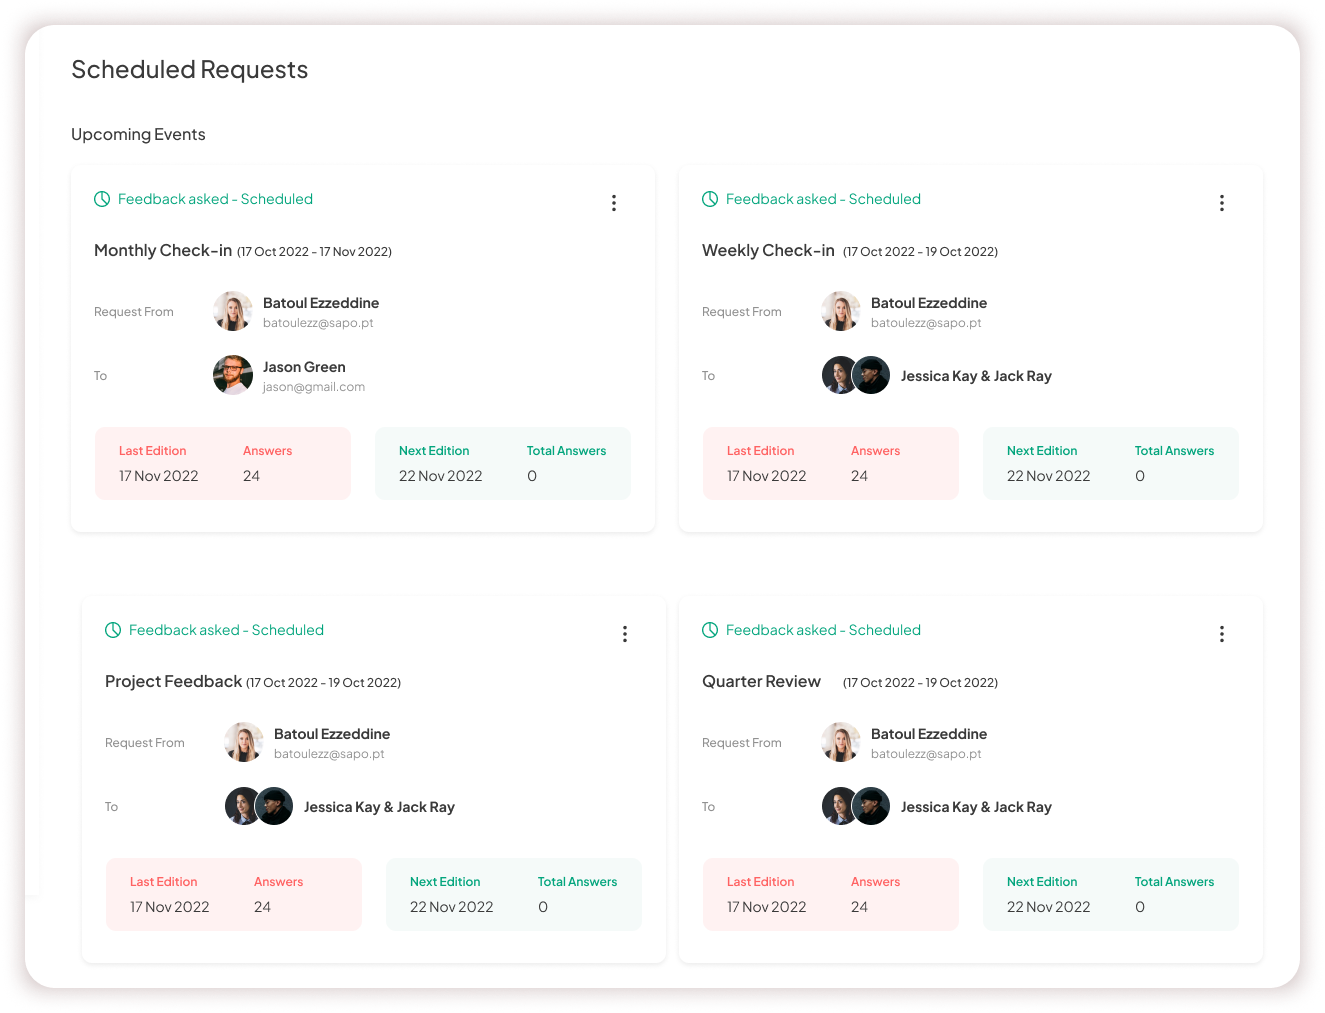 Dashboard of scheduled feedback requests from different teams